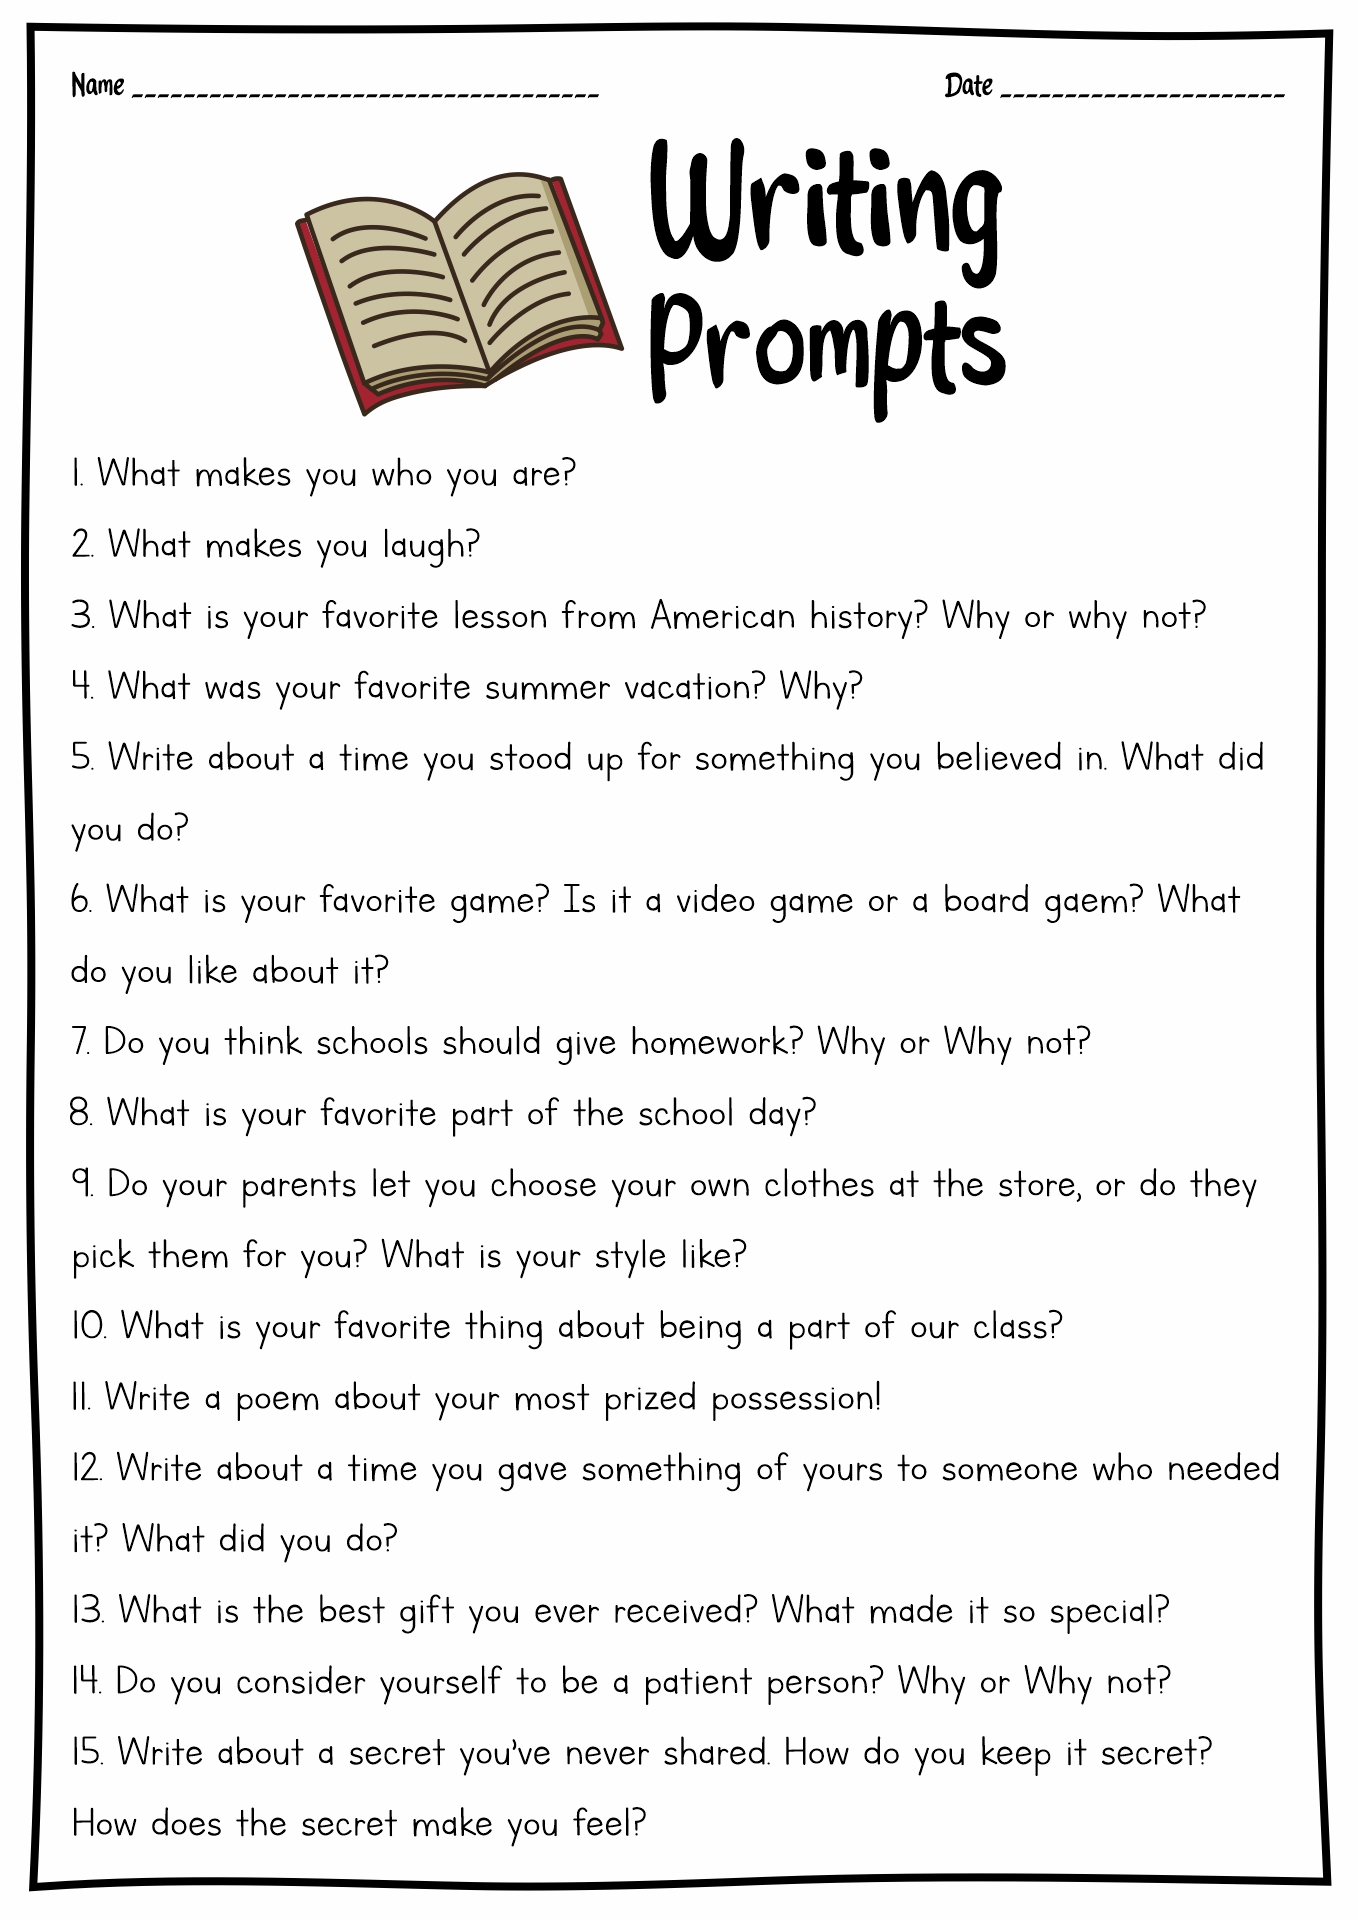 4th Grade Writing Prompts Image